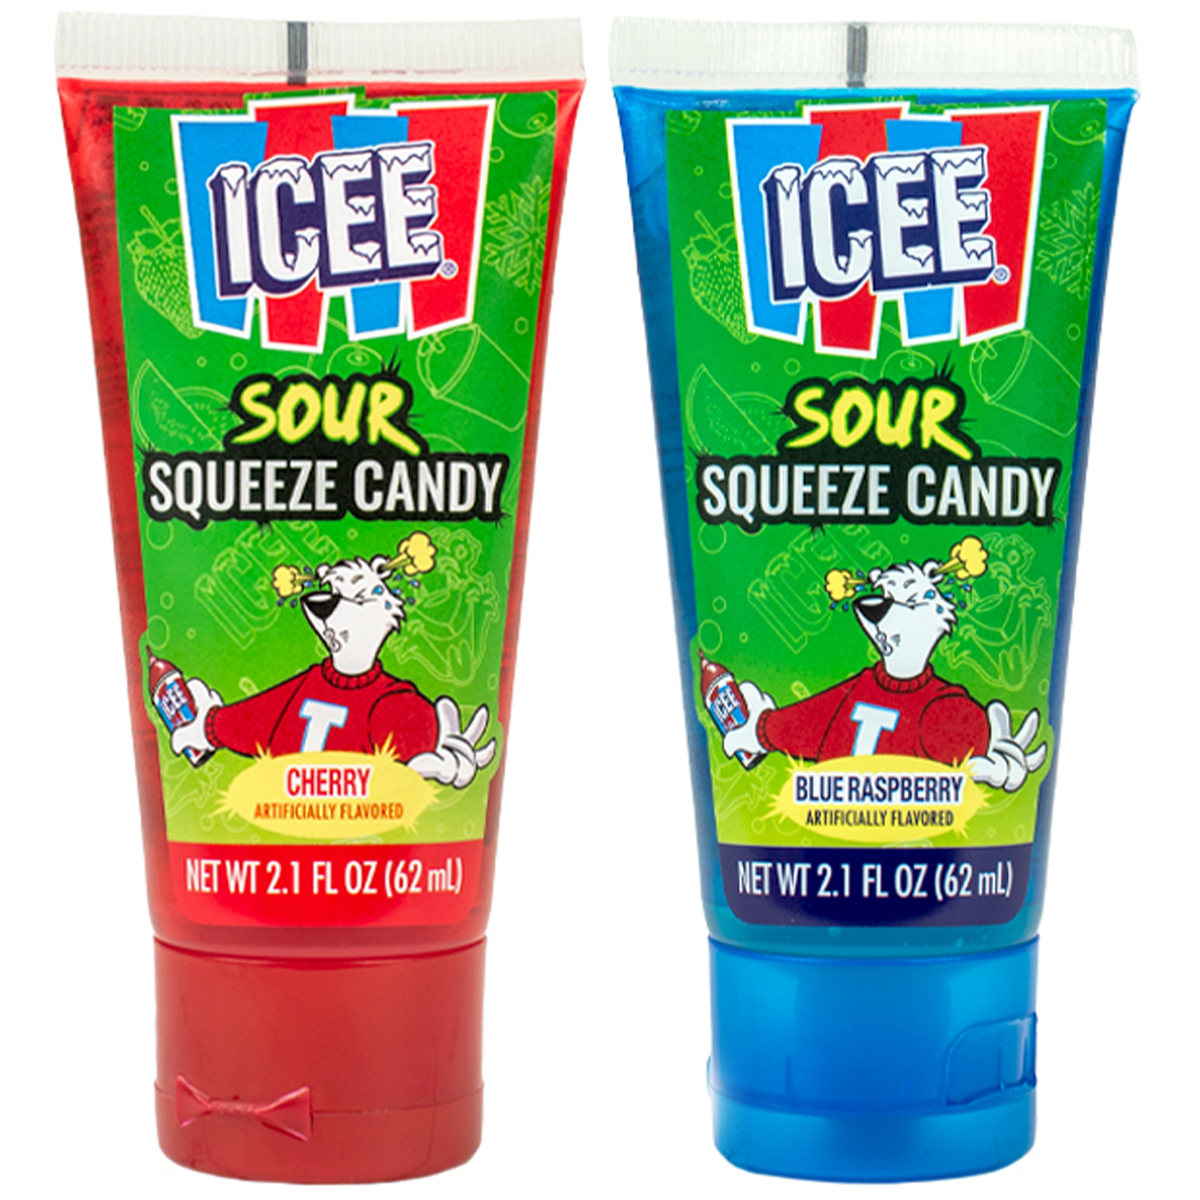 ICEE® Sour Squeeze Candy